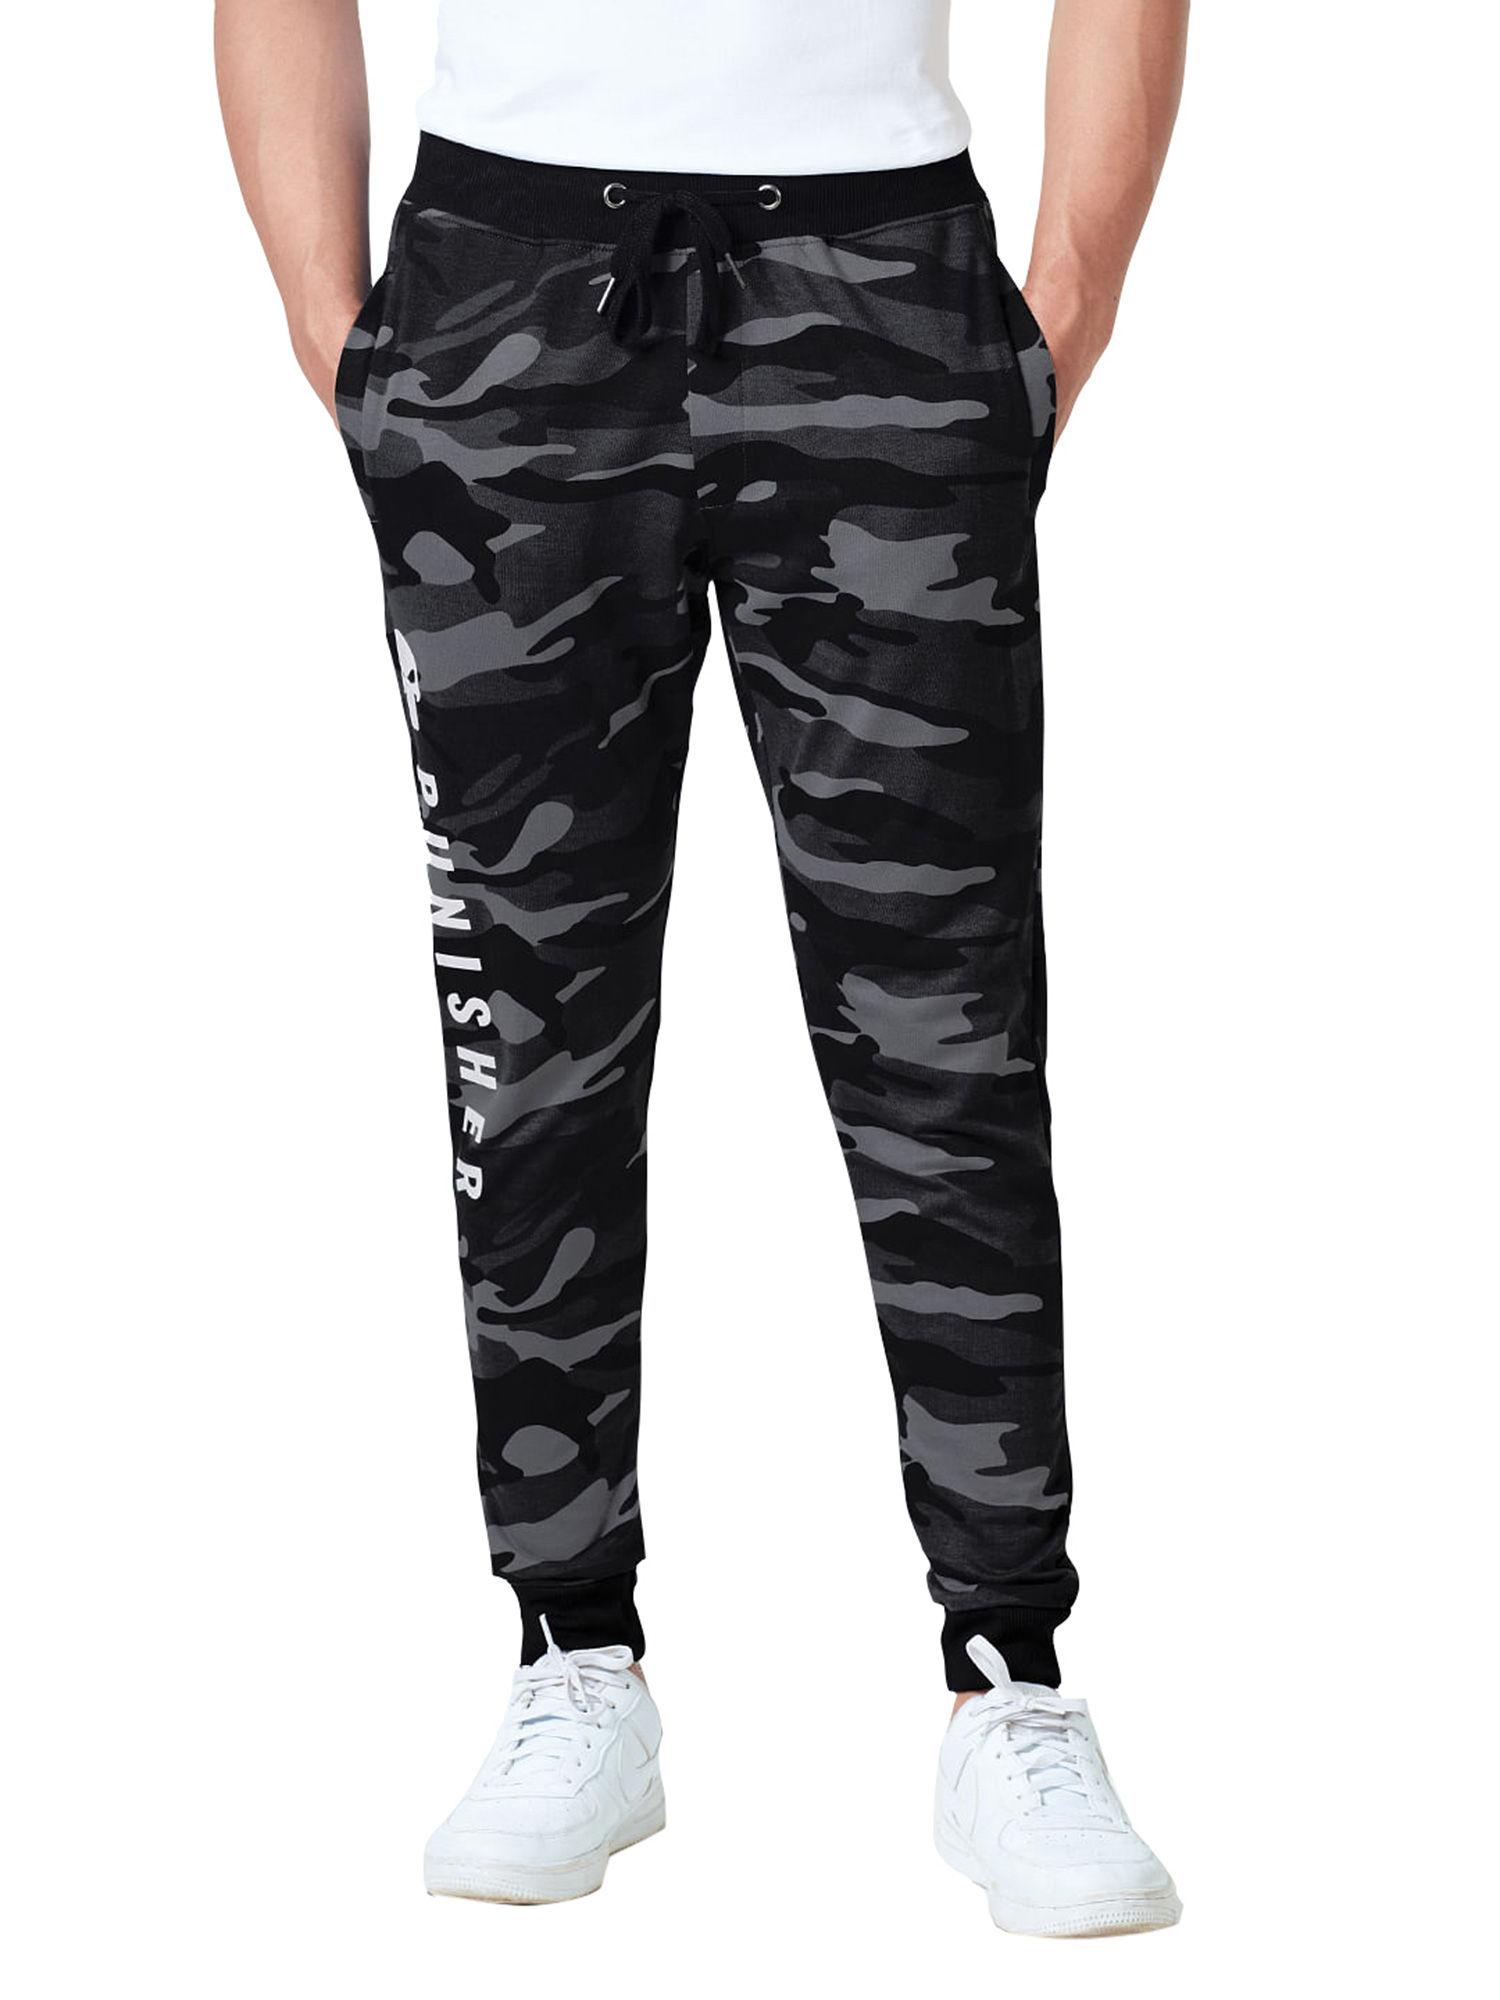 official punisher skull (camo) joggerss for mens